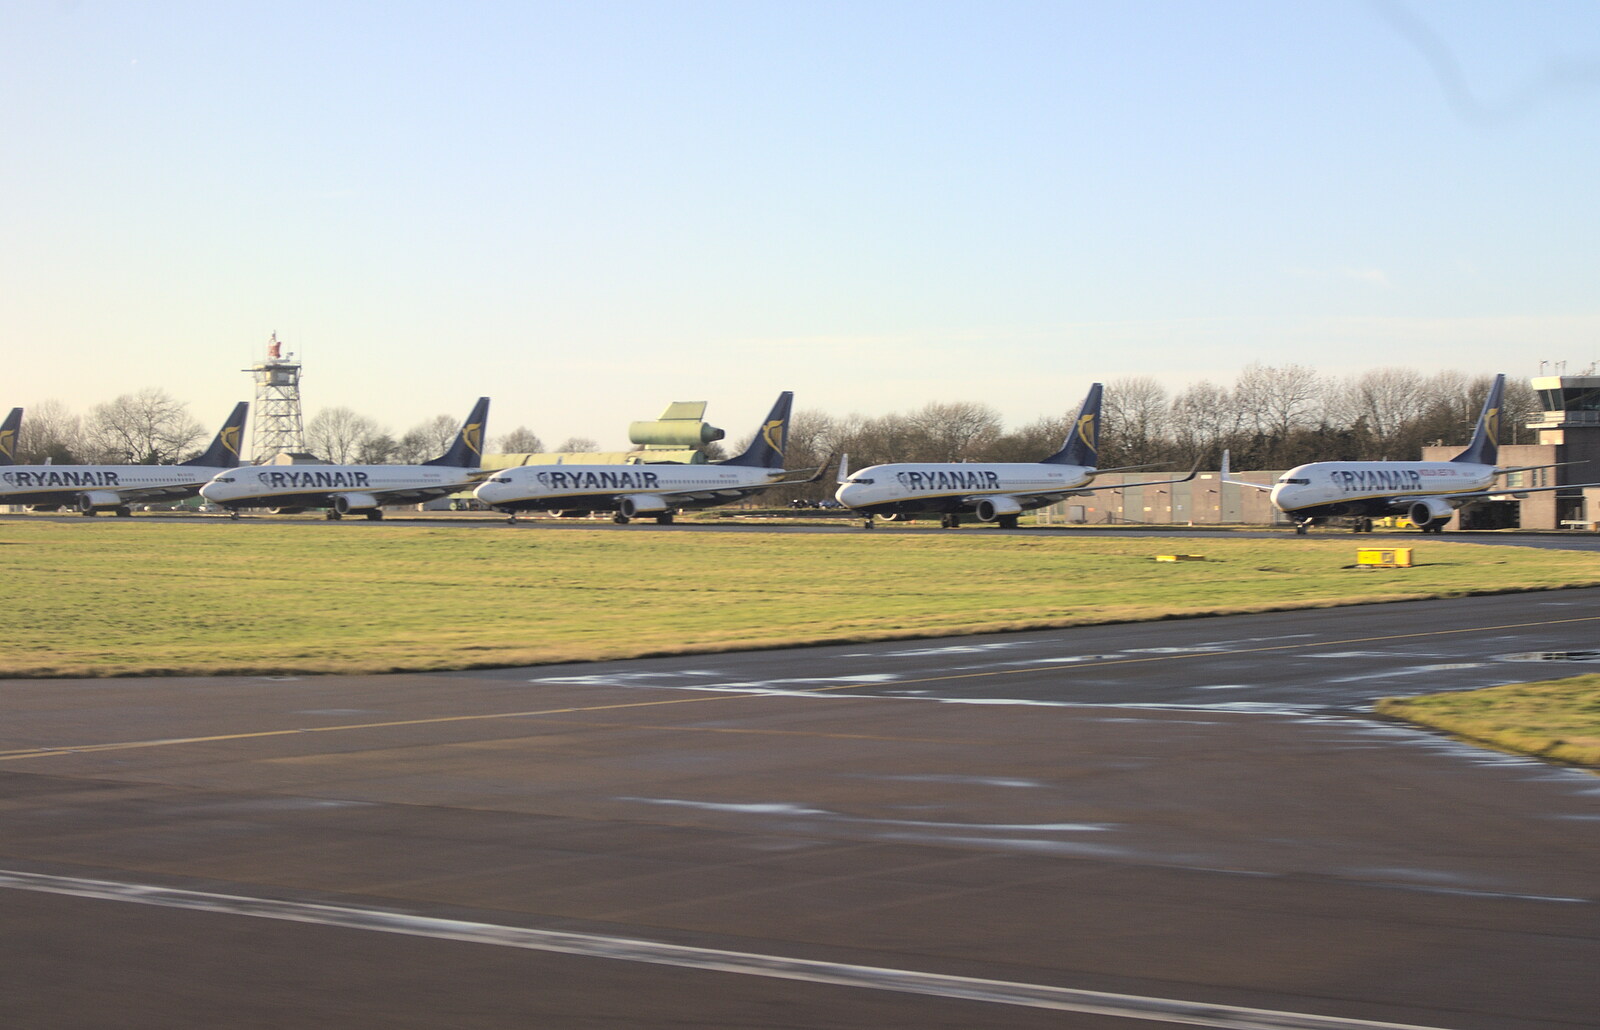 An unusually-large number of parked Ryanair planes from A Pre-Christmas Dinner, Monkstown, Dublin - 16th December 2012